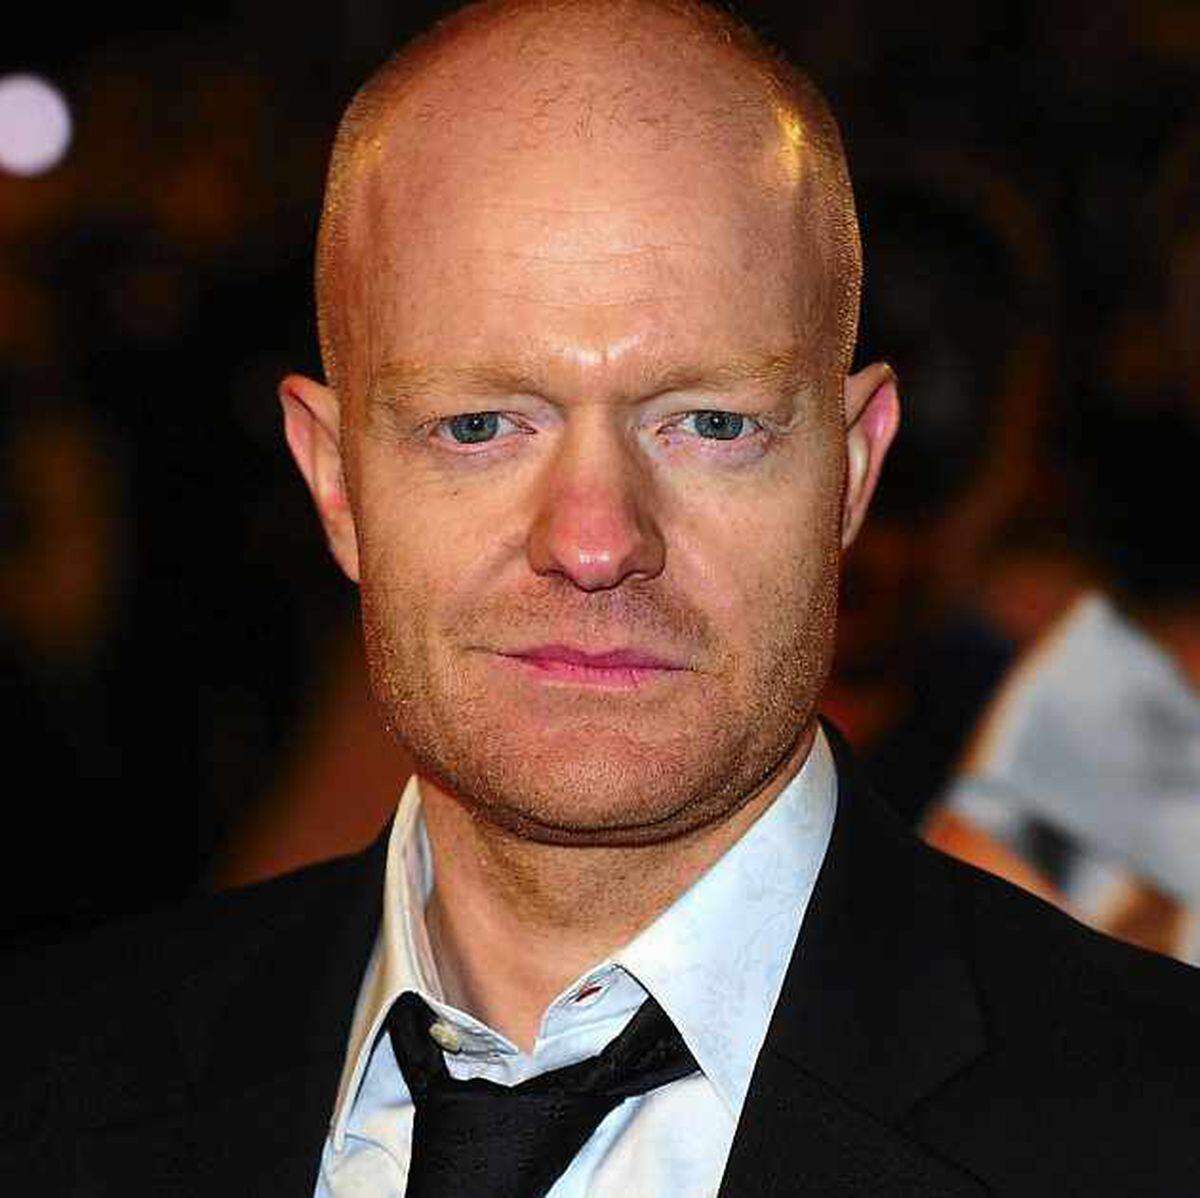 Eastenders' Jake Wood will also feature